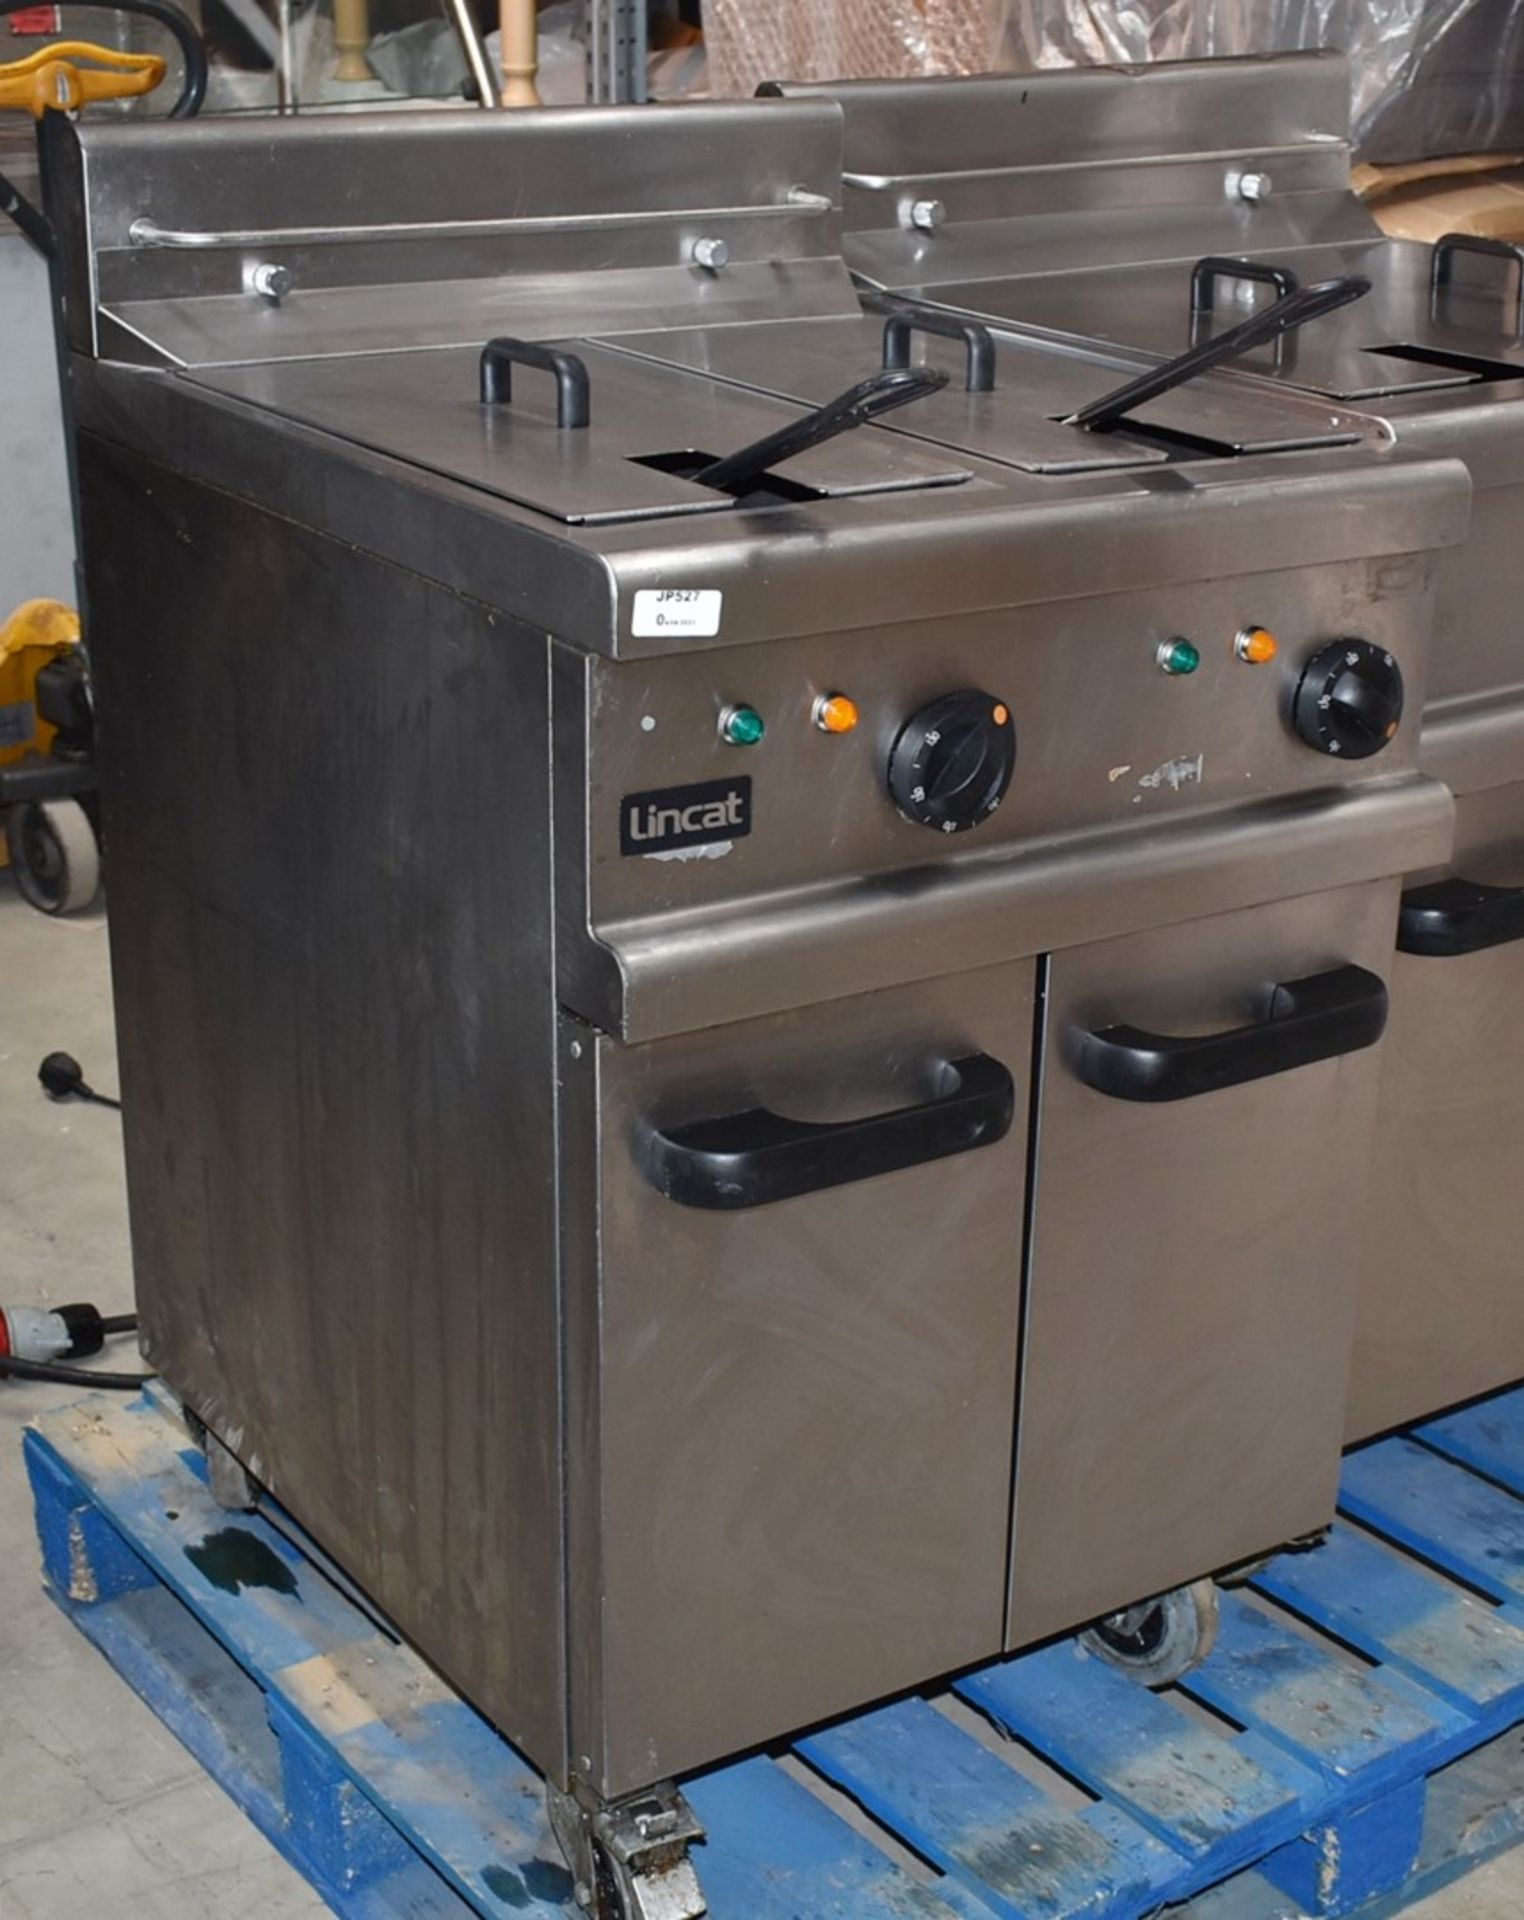 1 x Lincat Opus 700 OE7113 Single Large Tank Electric Fryer With Built In Filteration - 240V / 3PH P - Image 3 of 14